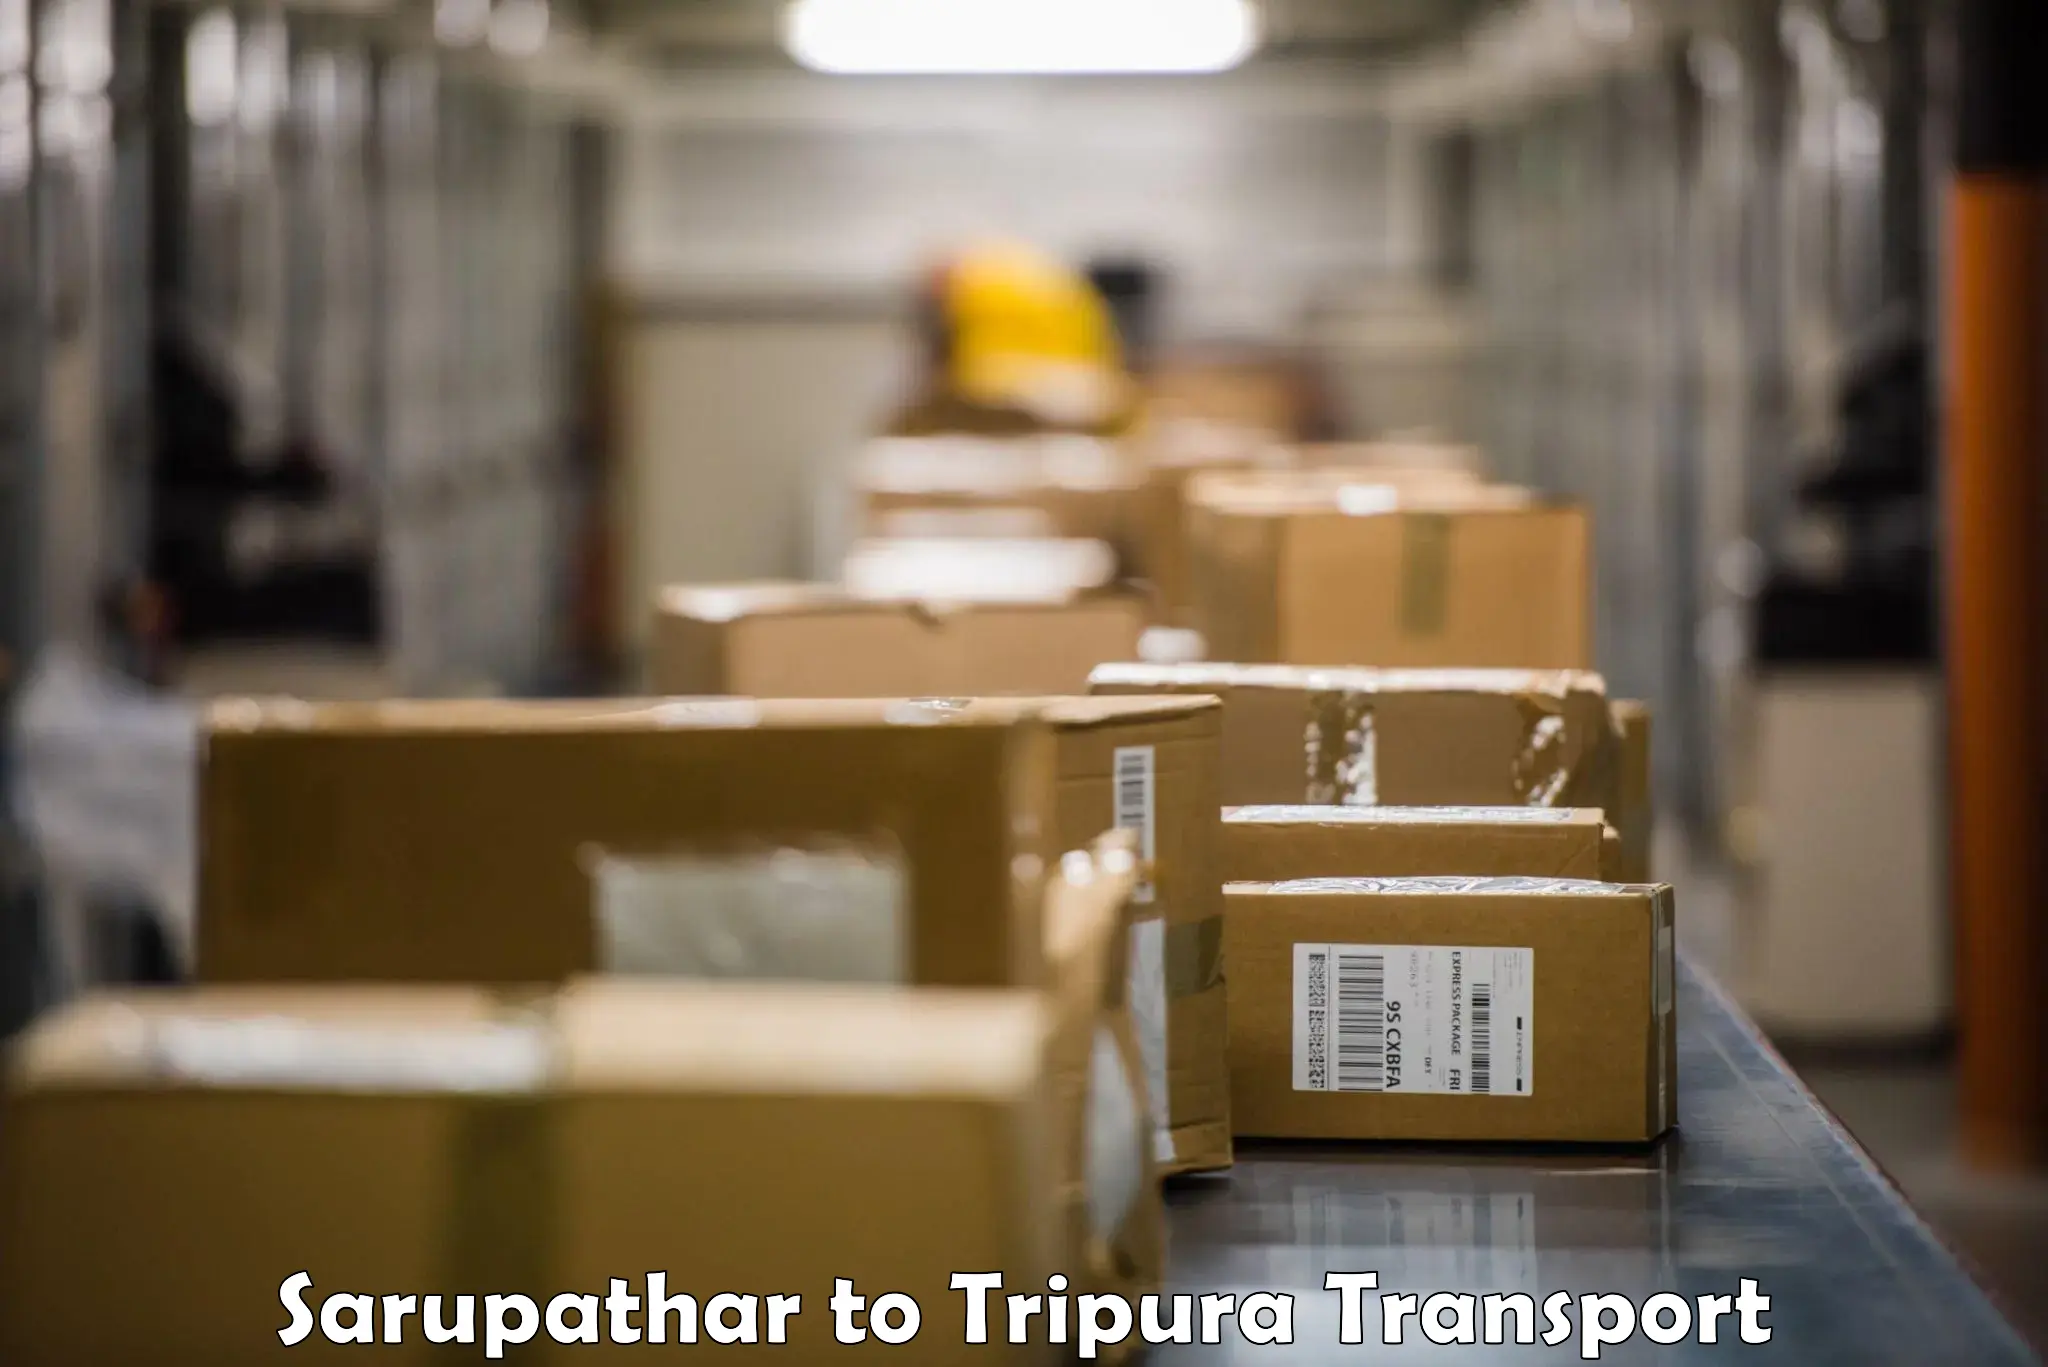 Commercial transport service Sarupathar to South Tripura